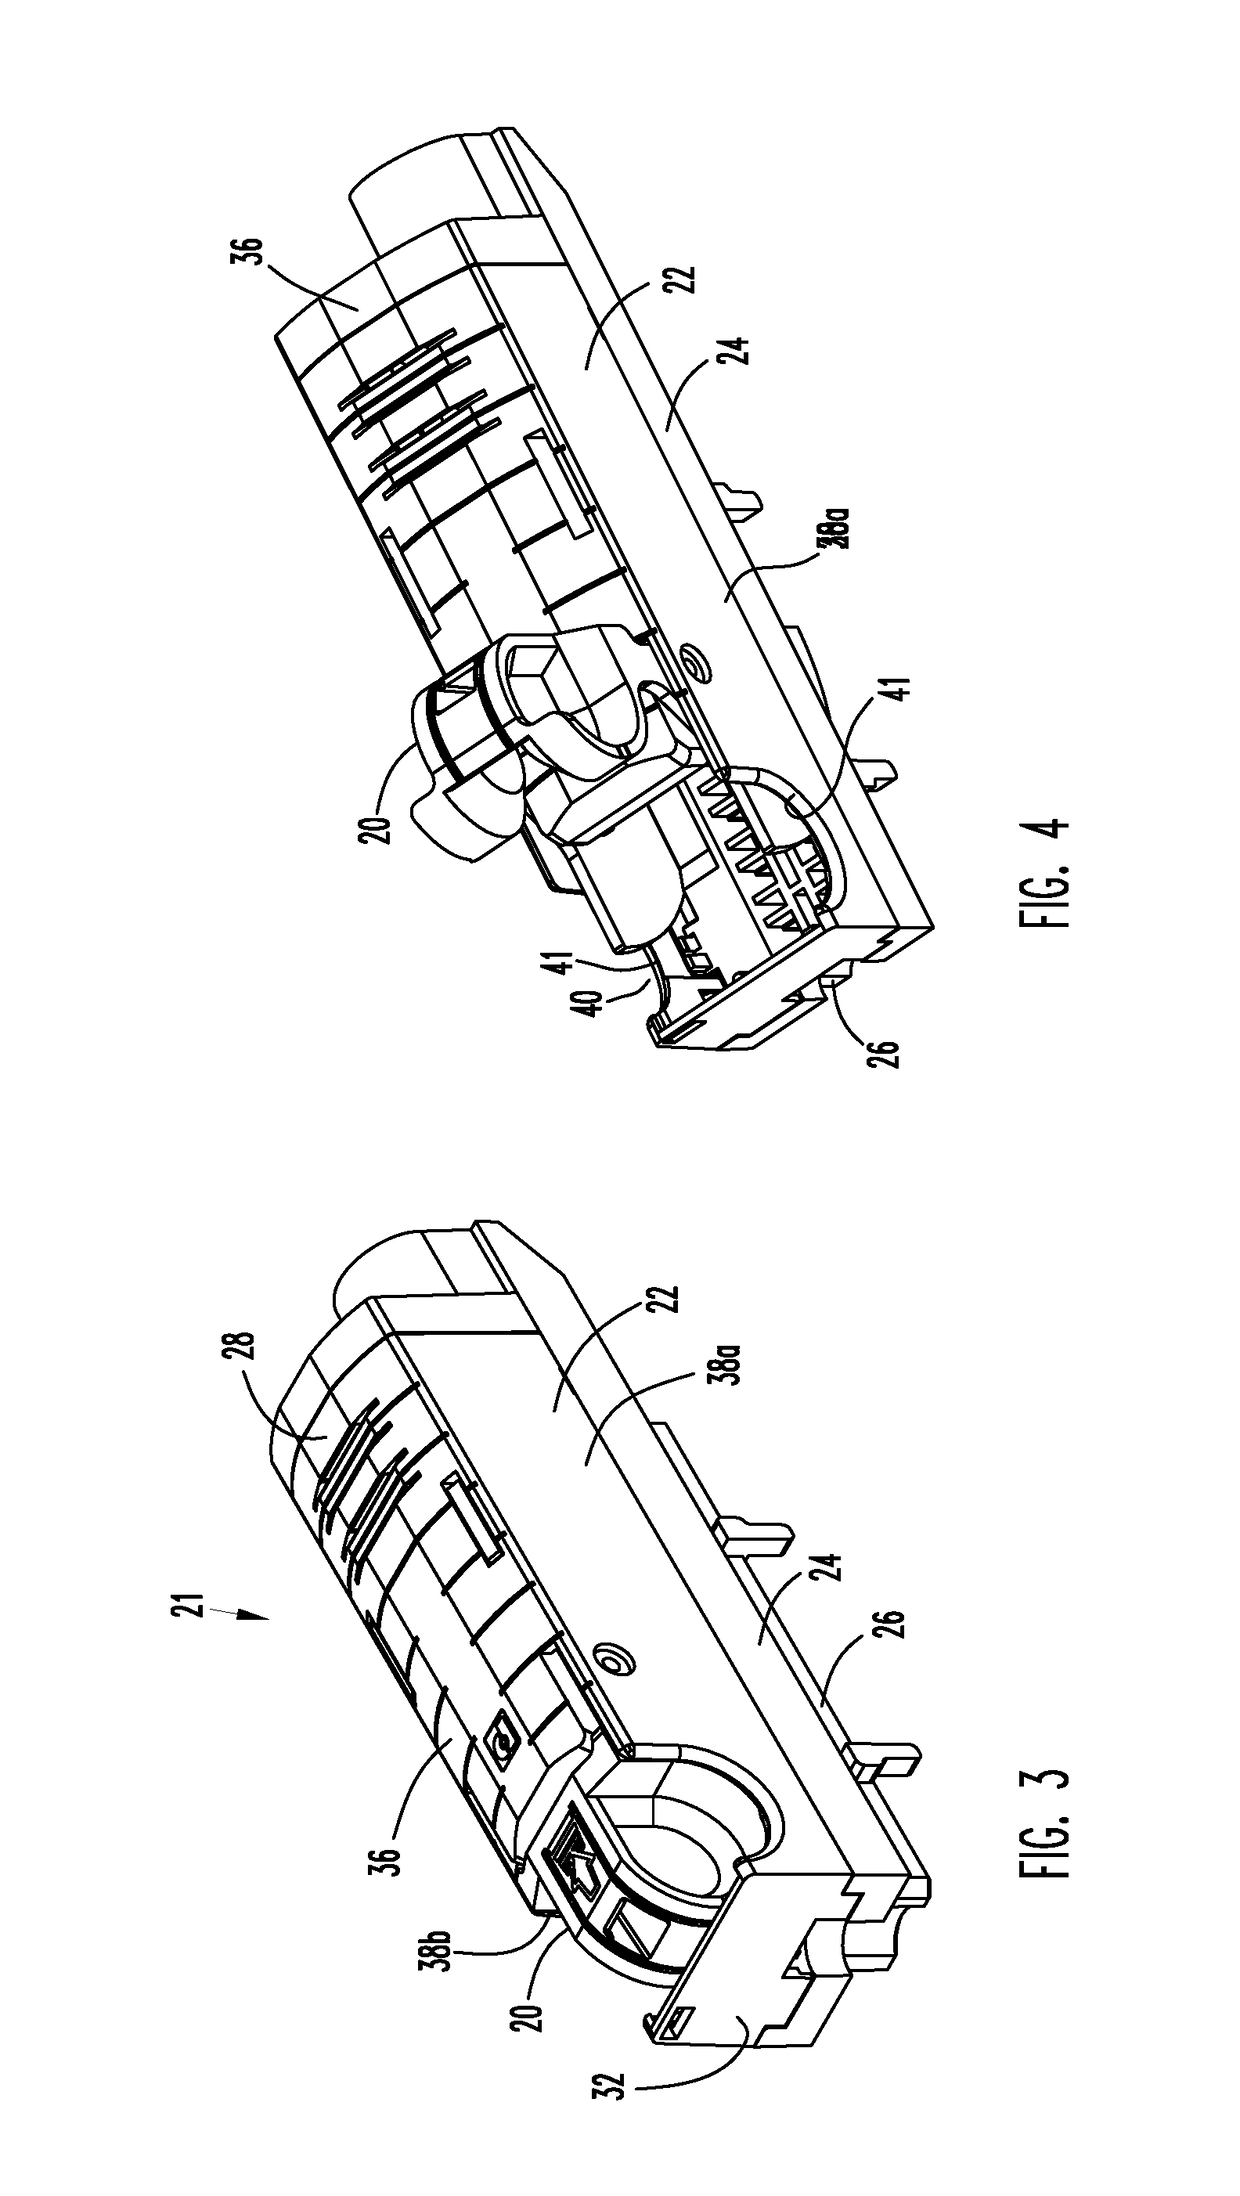 Lever-type electrical connector body and related electrical connector assembly